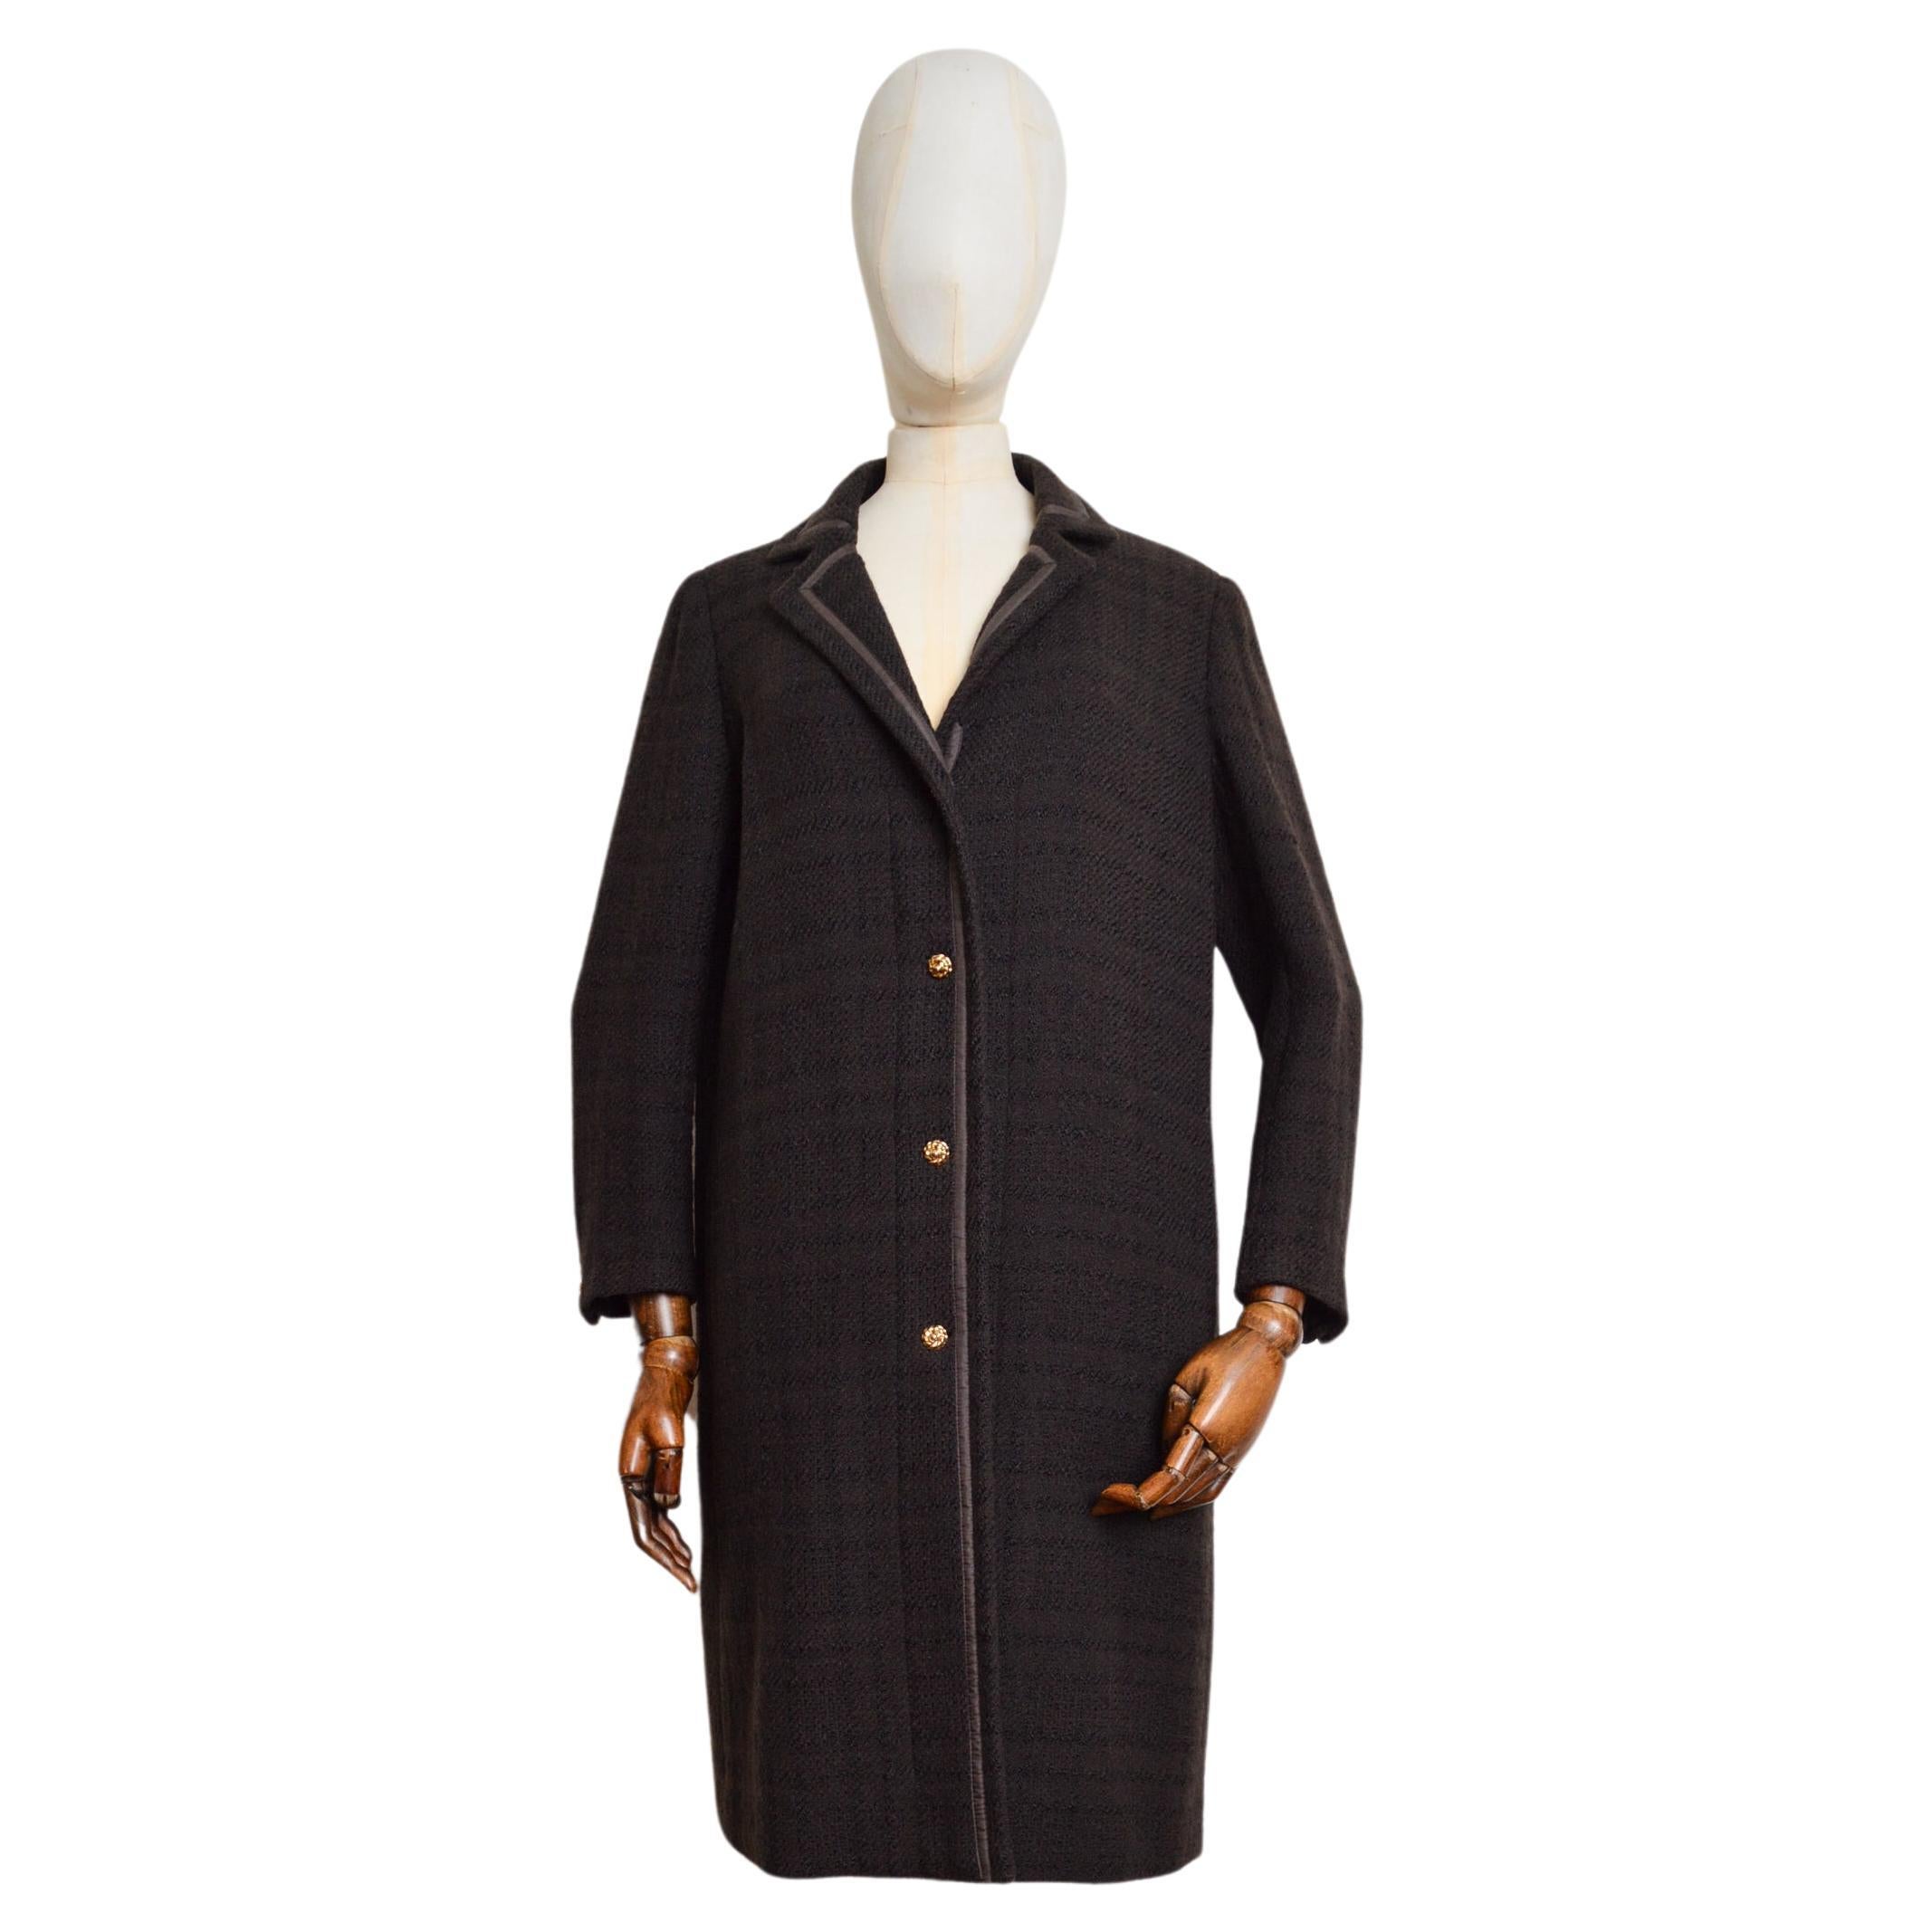 Chic Vintage CHANEL Chocolate Brown Wool & Silk Chesterfield Coat, Circa 1980.  

MADE IN FRANCE.  

This Timeless, Understated, Vintage CHANEL Coat features long sleeves, Gold Flower Shaped 'Chanel' stamped buttons, a simple Pure Silk lining, and